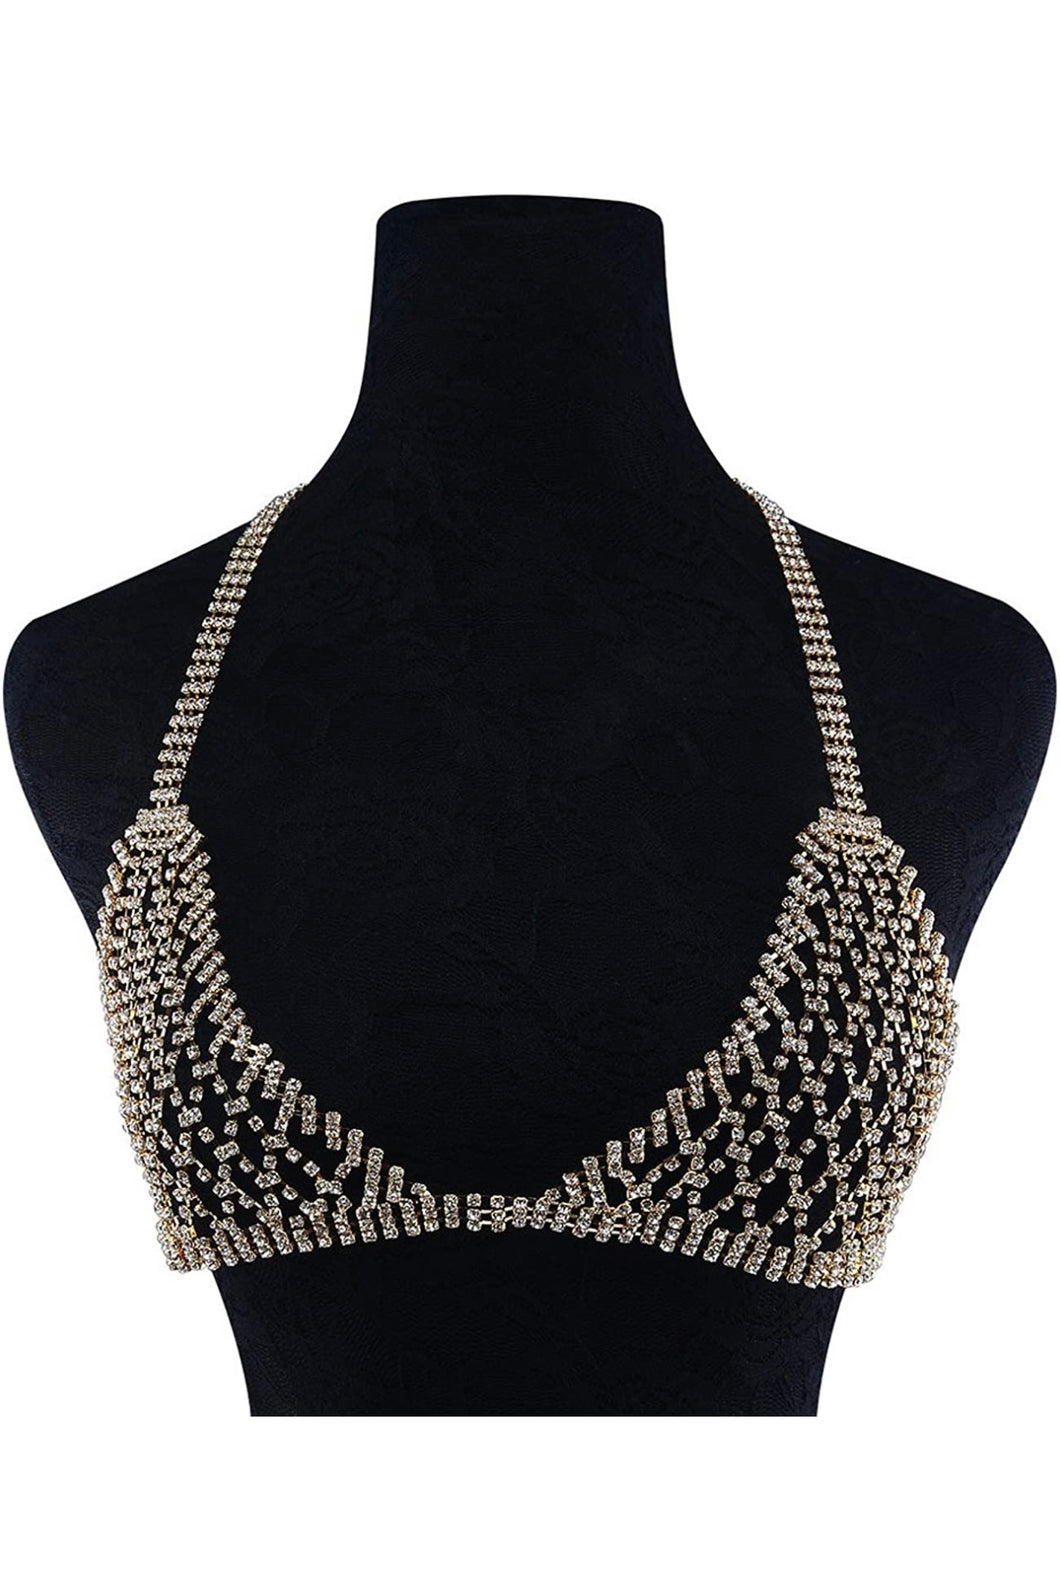 Crystal bra top chain gold